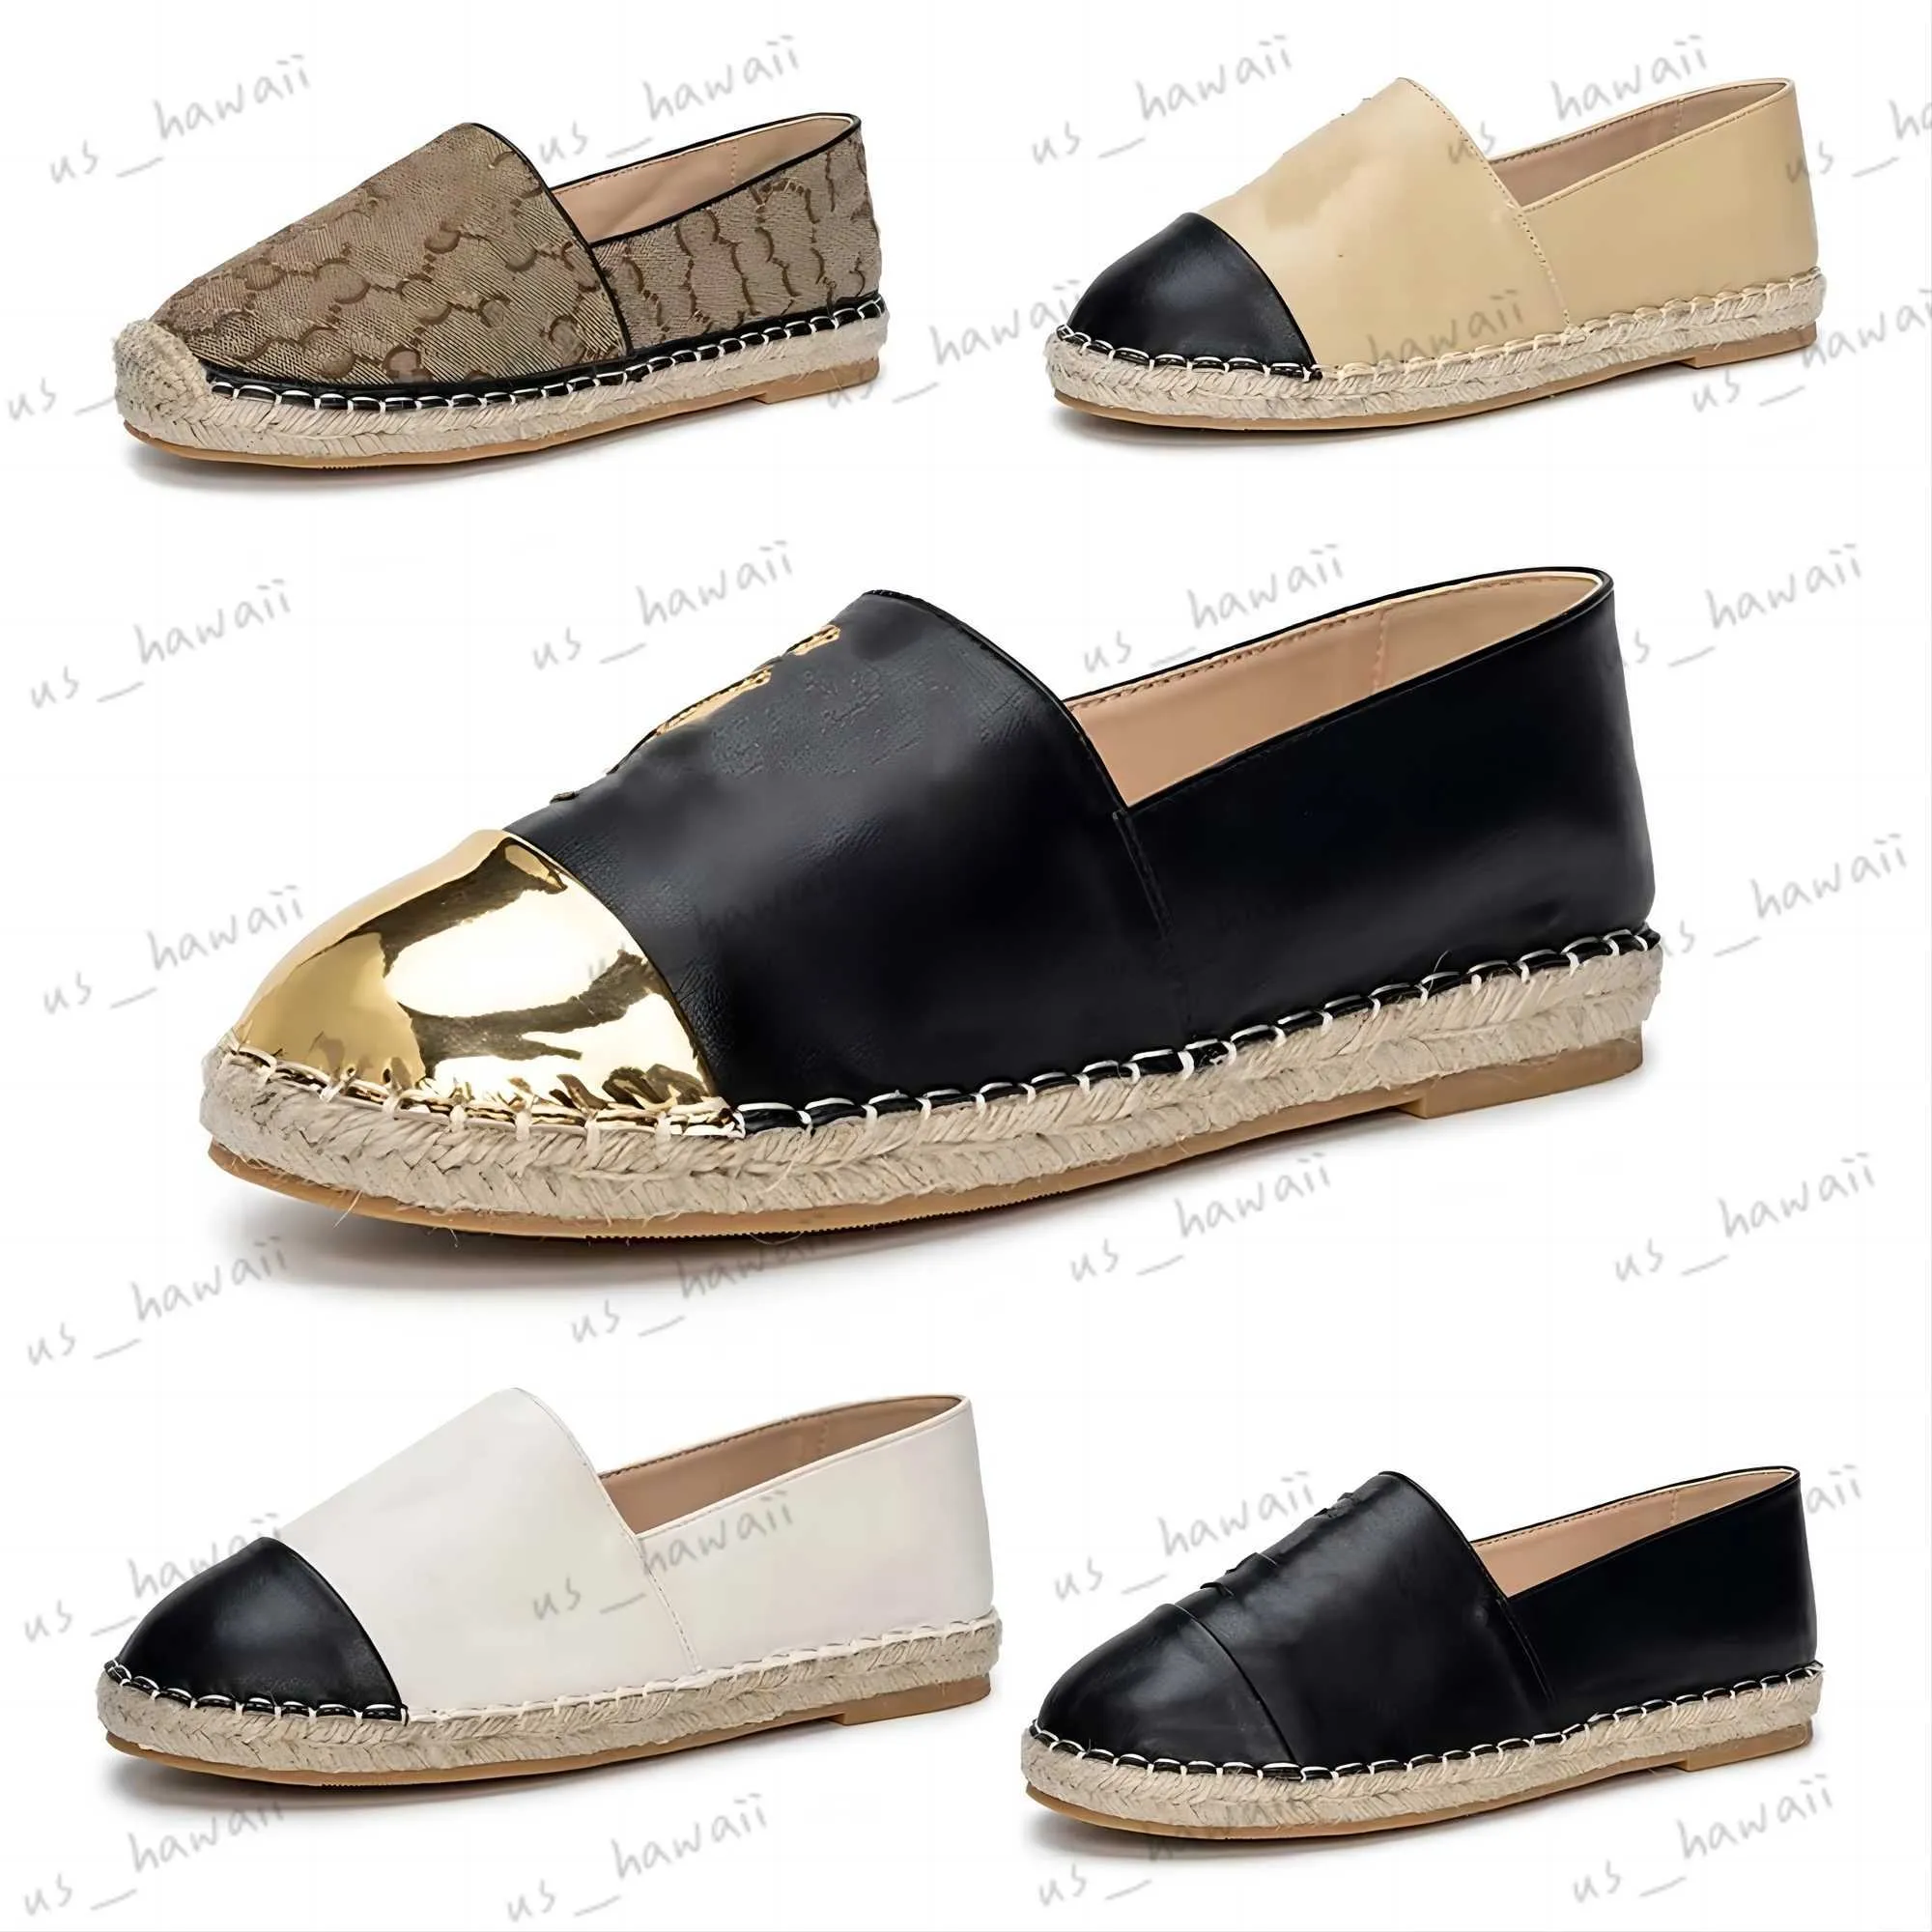 Sandals Luxury Shoes For Women Designer Loafers Woman Sandals Espadrilles Autumn Slides ladies flat Beach Half Slippers fashion female Fisherman canvas shoe with b